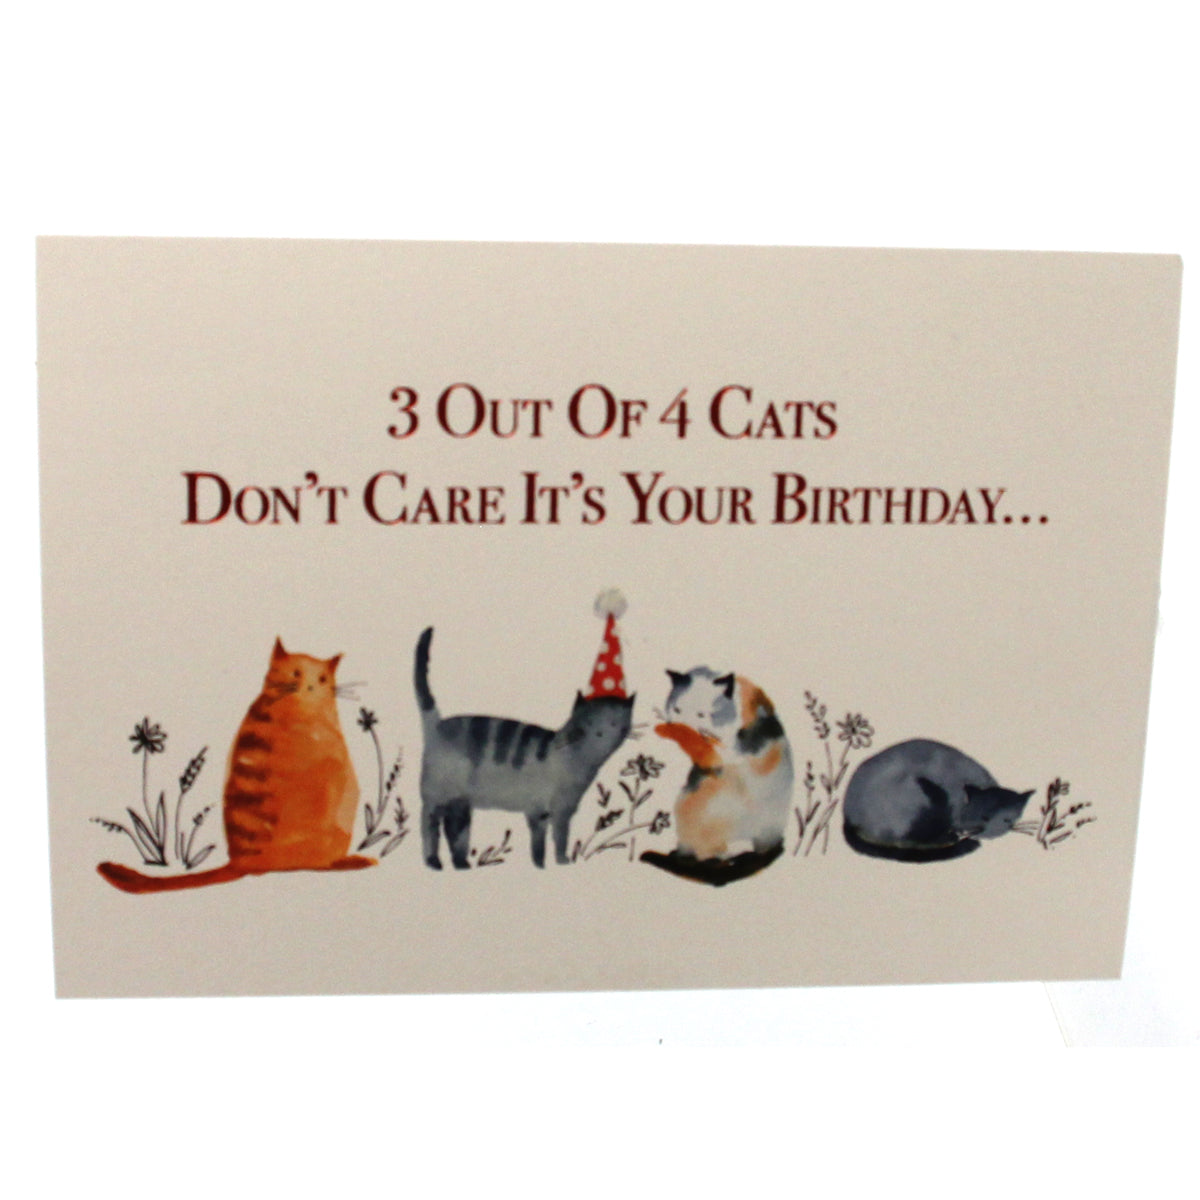 Birthday Card: 3 out of 4 cats...